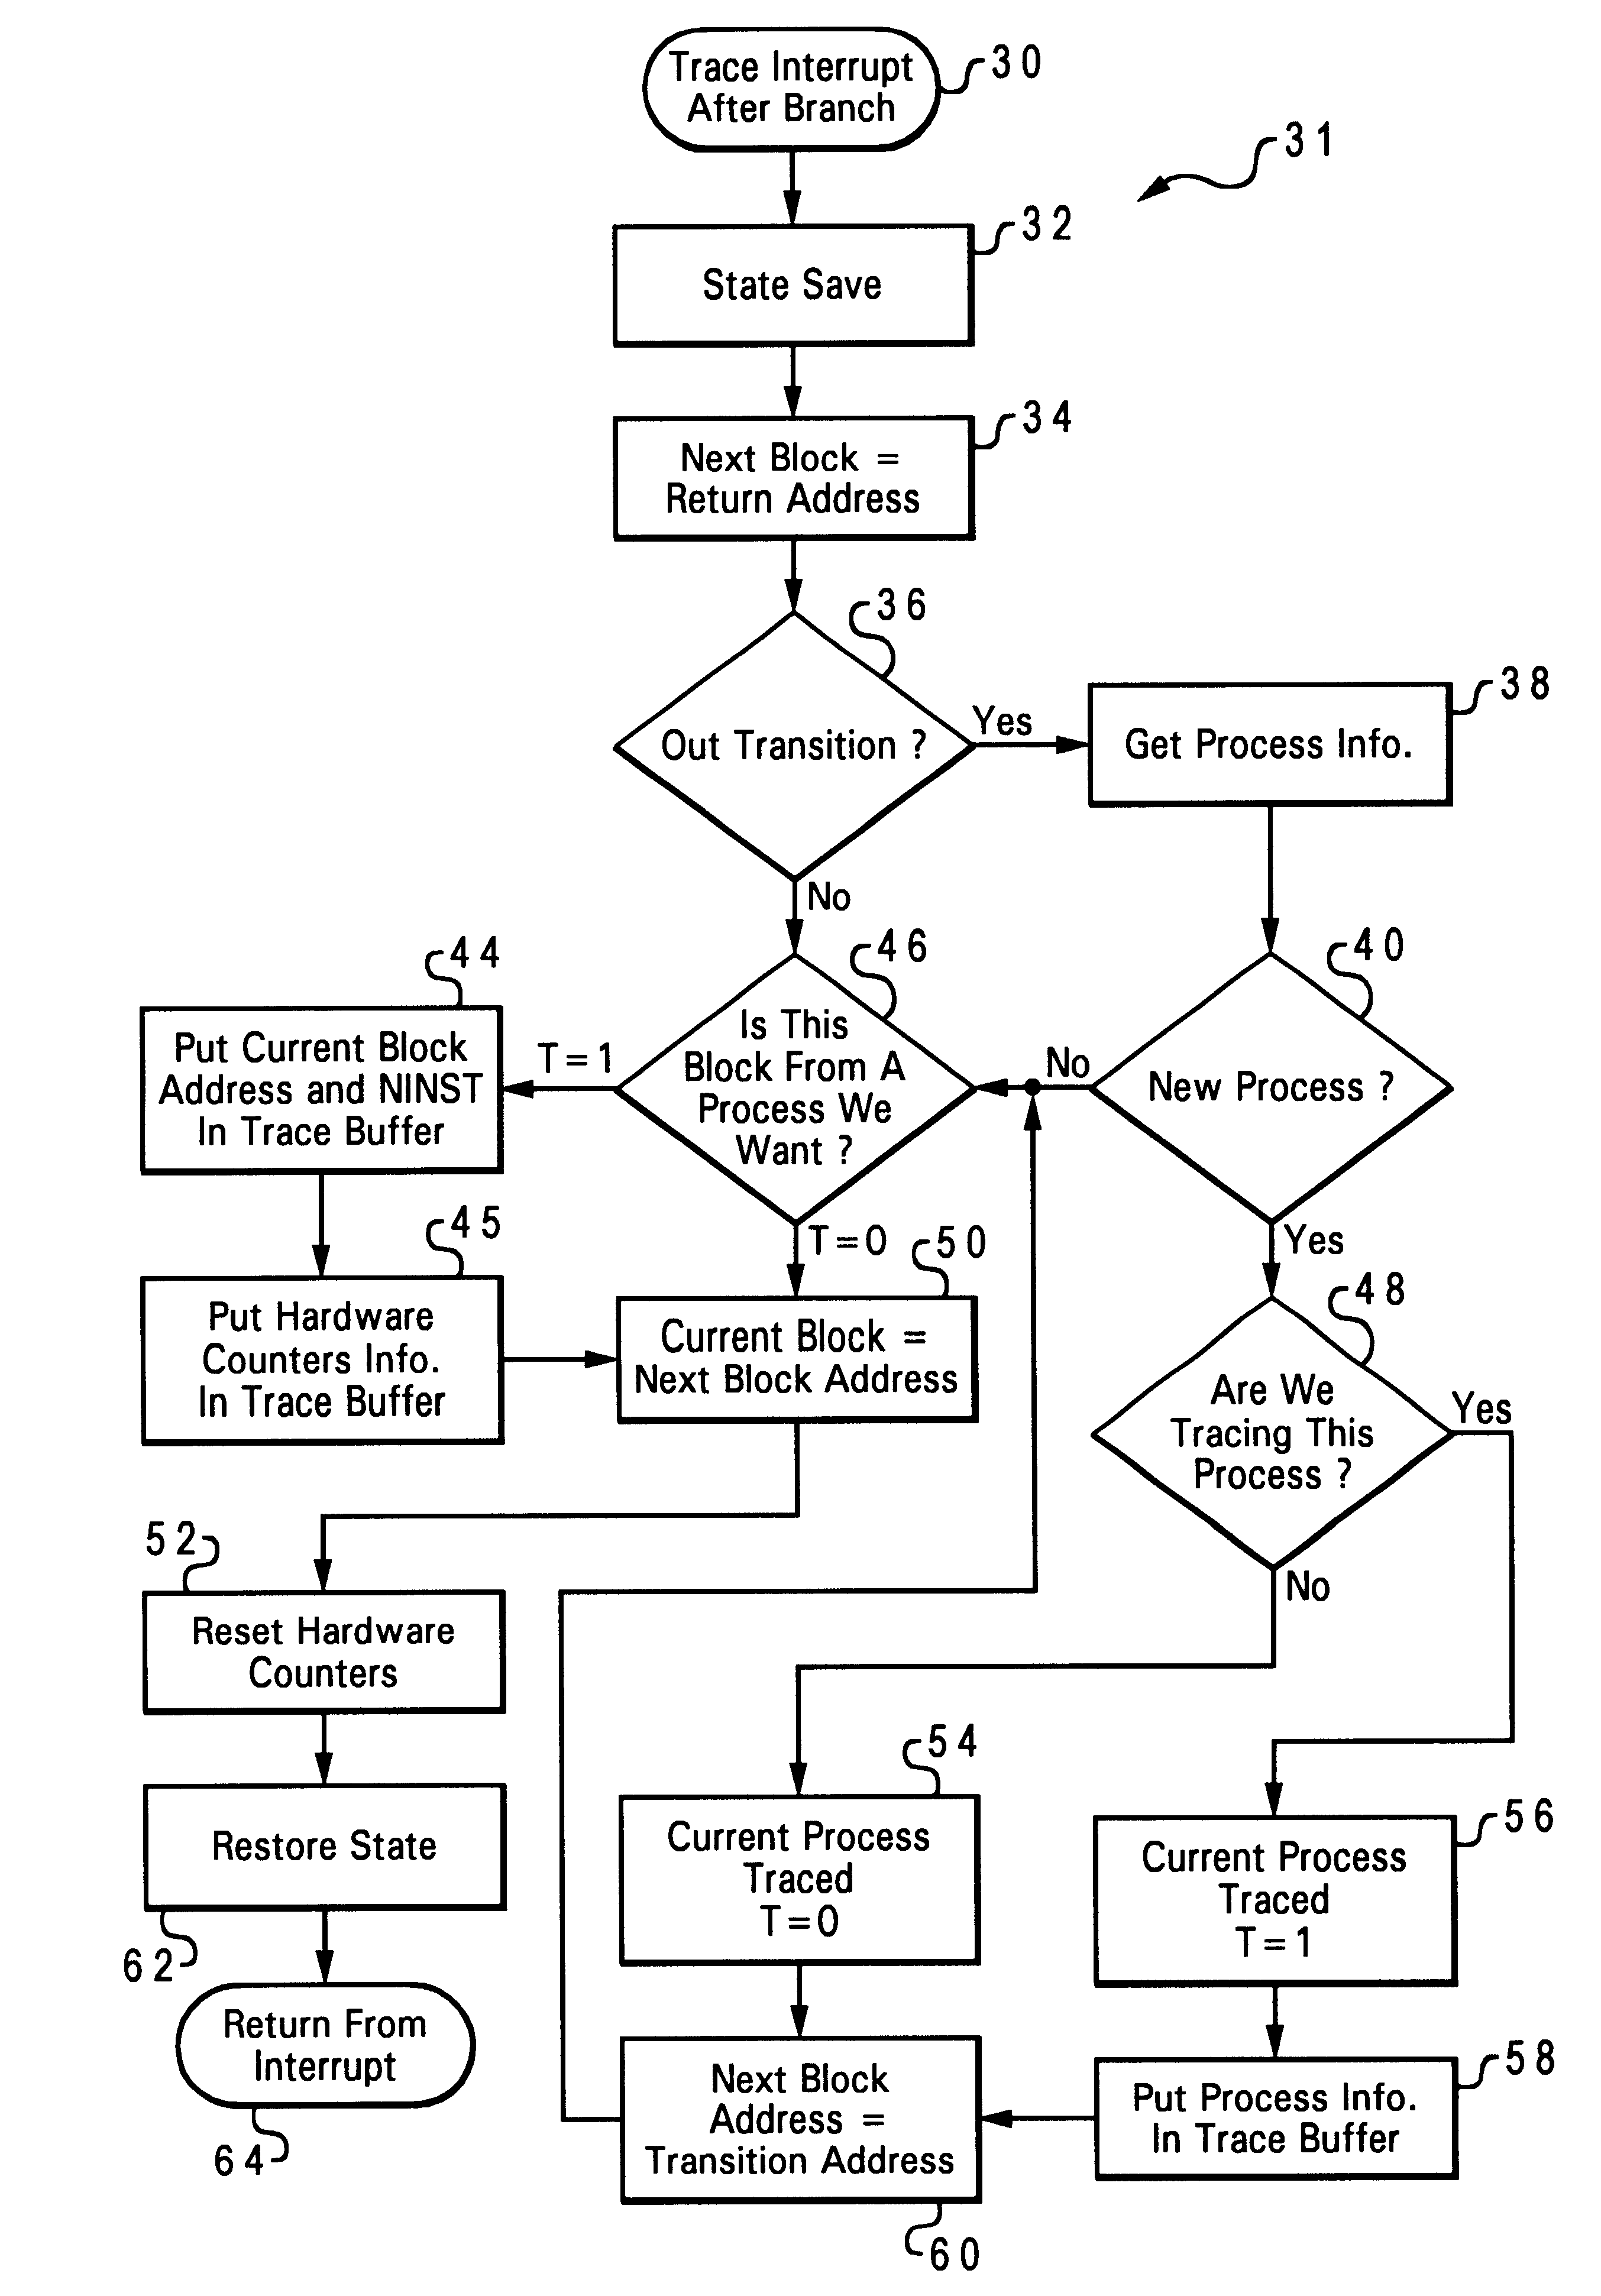 System for tracing hardware counters utilizing programmed performance monitor to generate trace interrupt after each branch instruction or at the end of each code basic block